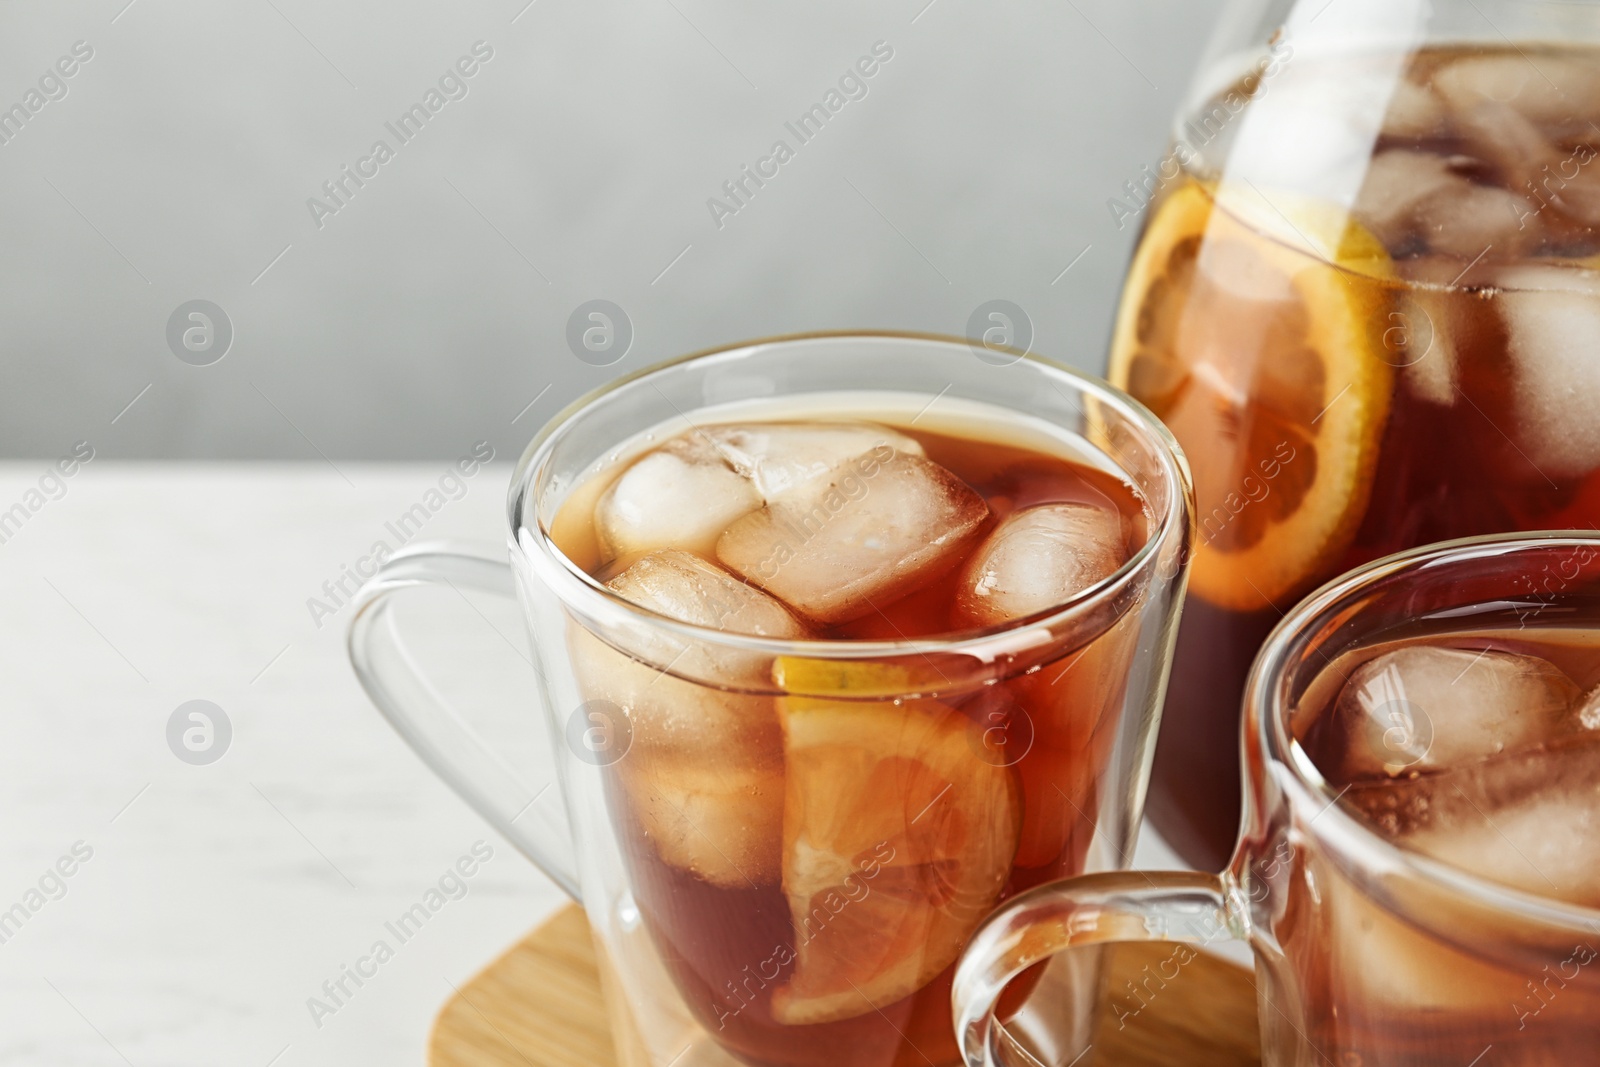 Photo of Cups and jug of refreshing iced tea on light table